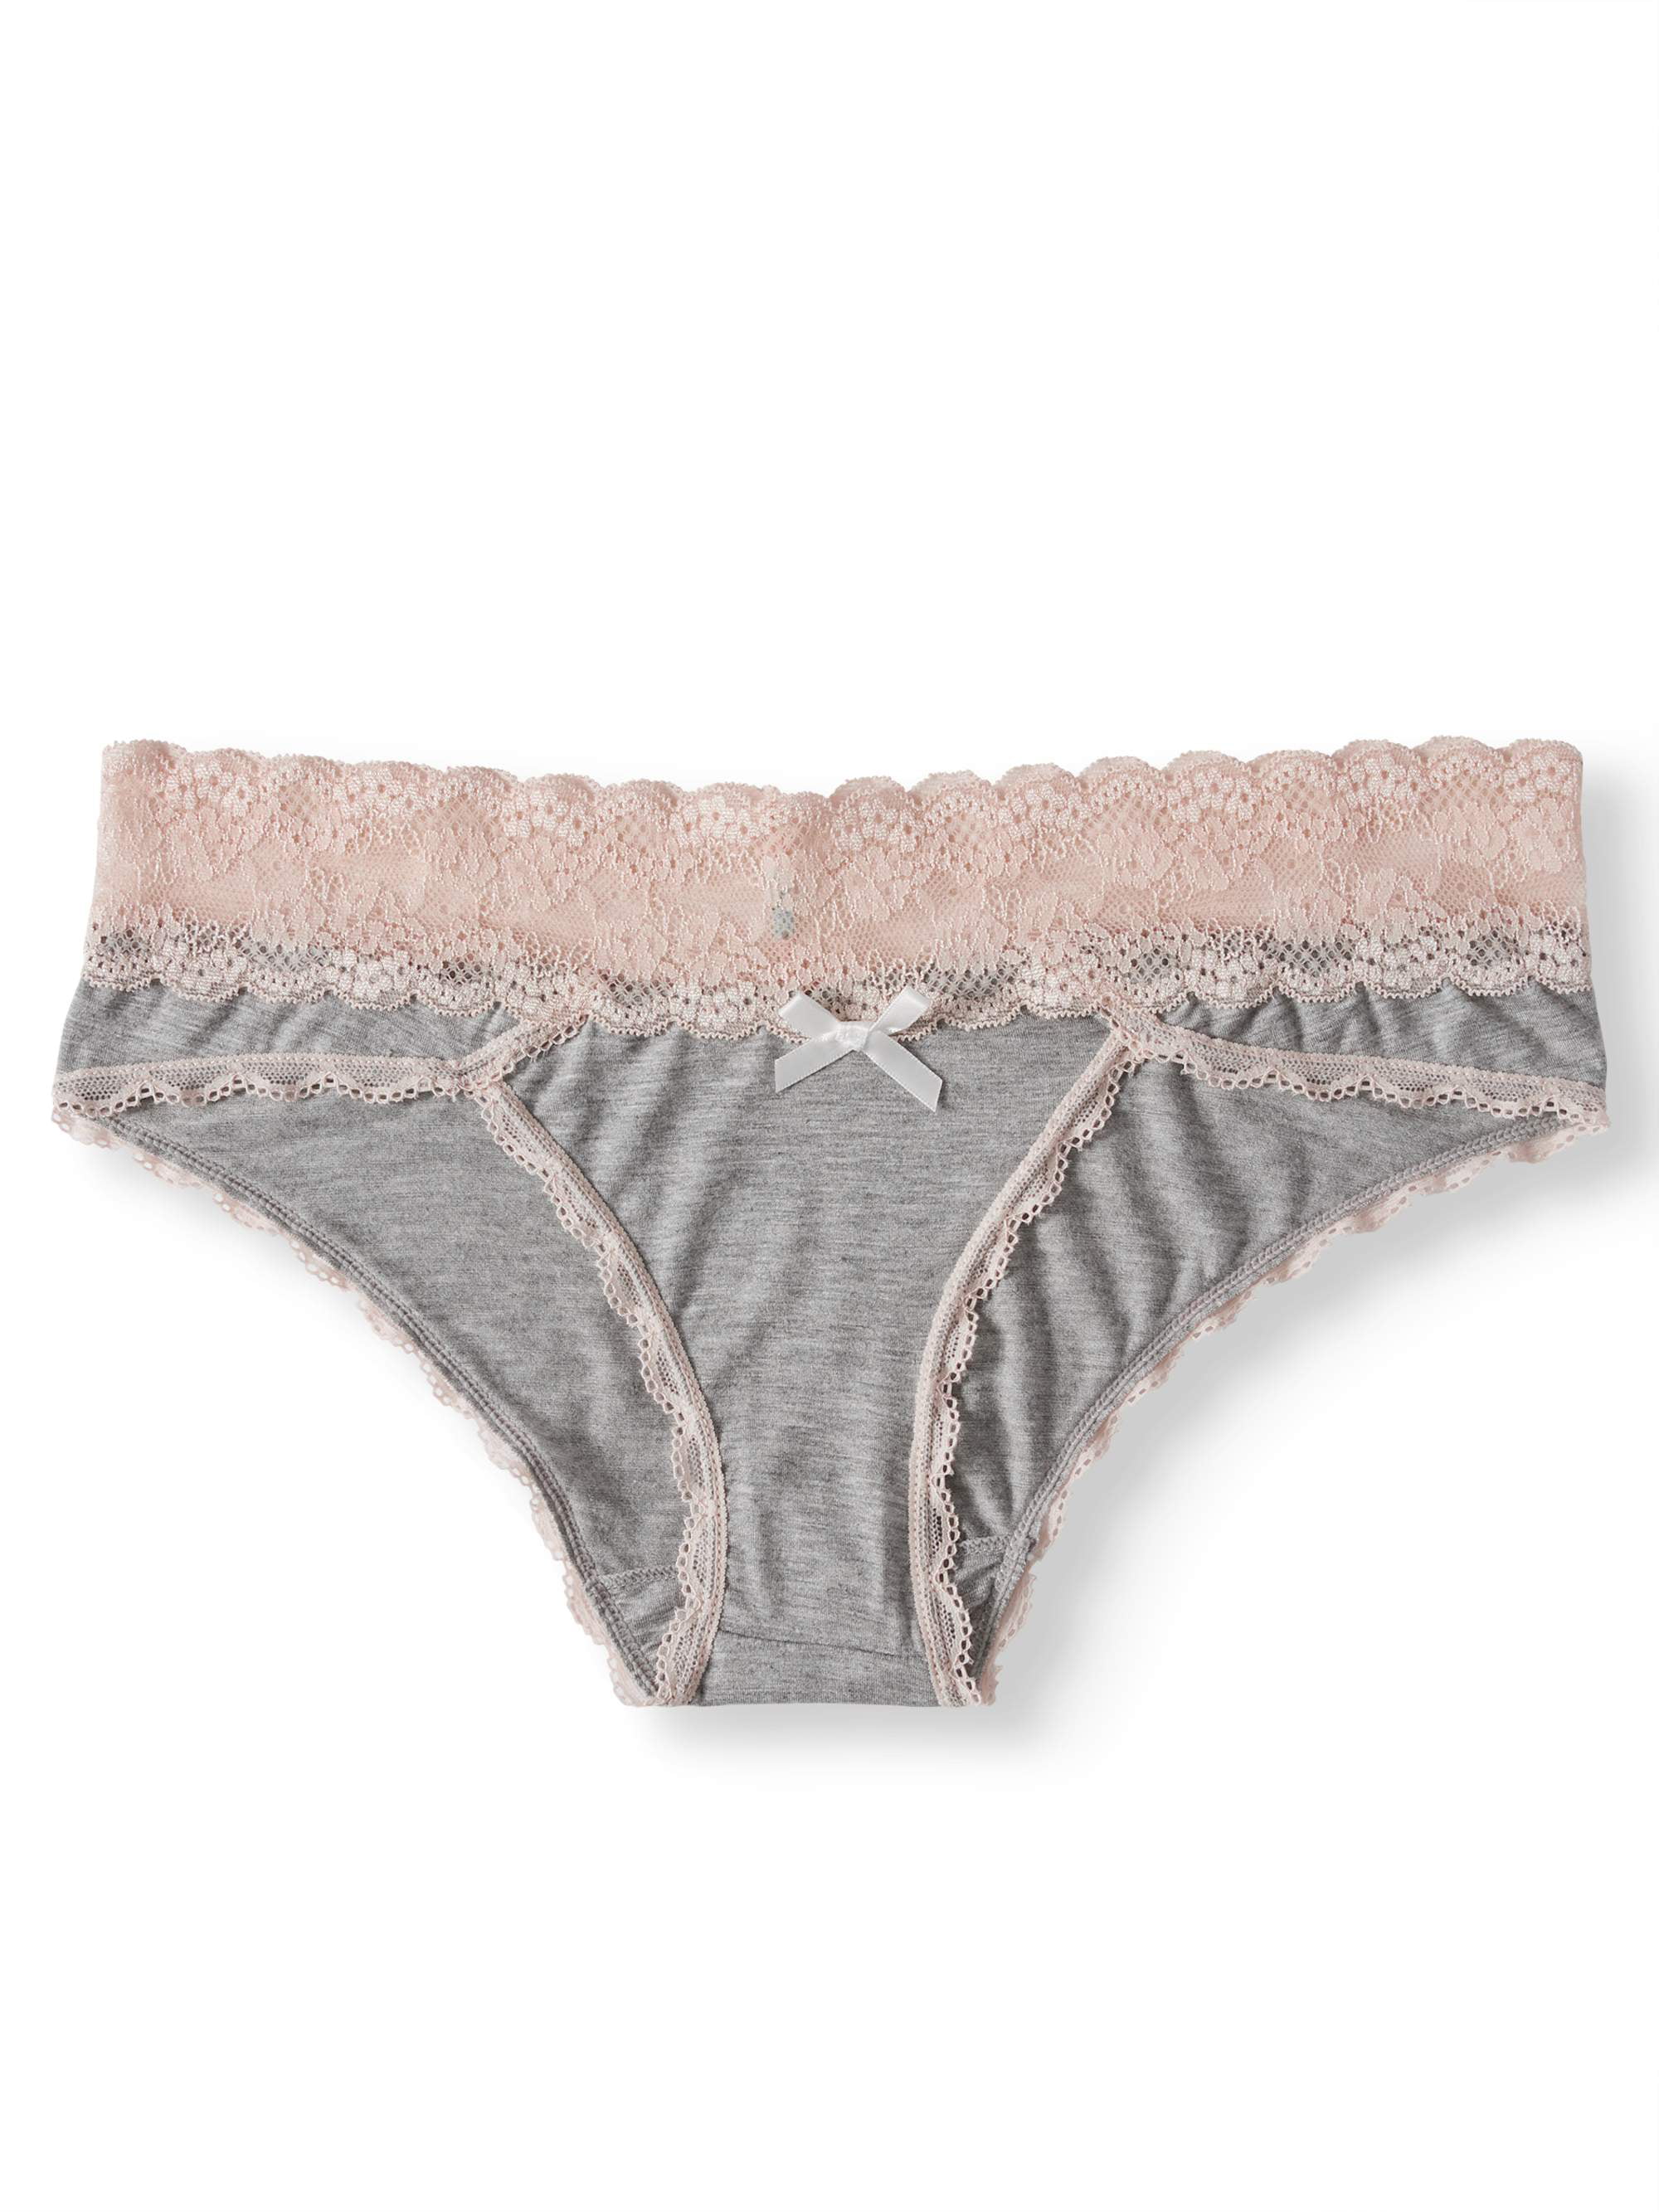 Women's honeydew 200461 Ahna Rayon And Wide Lace Hipster Panty (Heather  Grey/Seashell S) 